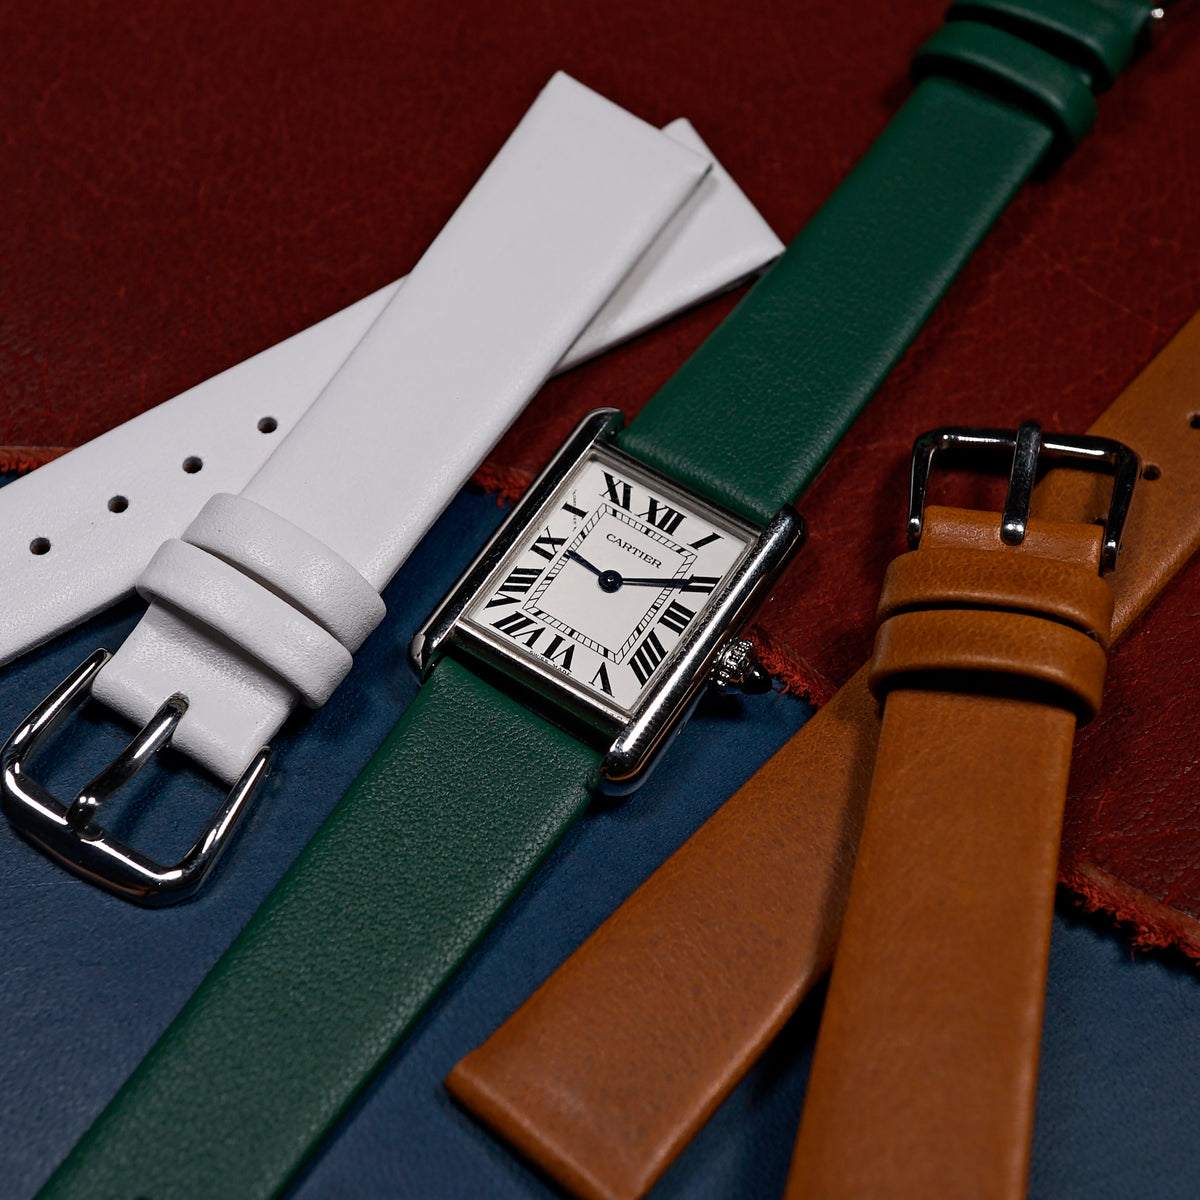 Unstitched Smooth Leather Watch Strap in Green - Nomad Watch Works SG